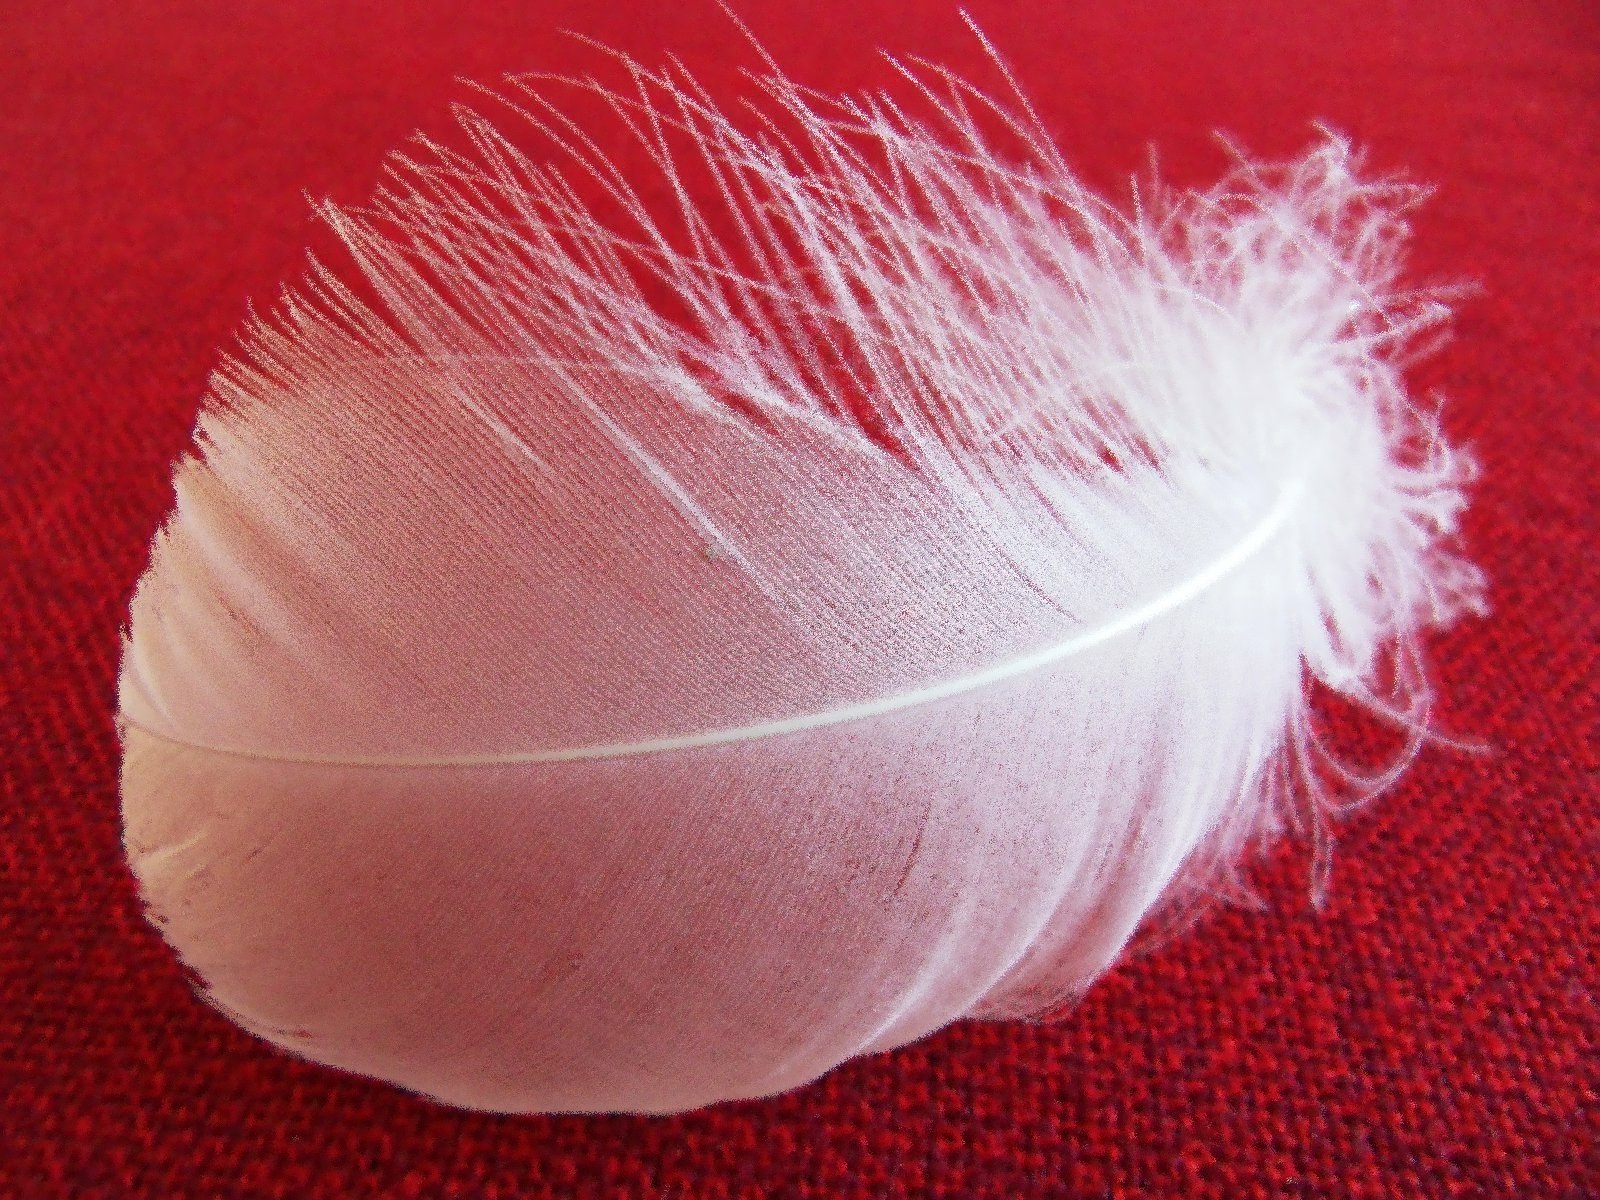 White Feathers After Someone Dies - Red And White Feathers - HD Wallpaper 